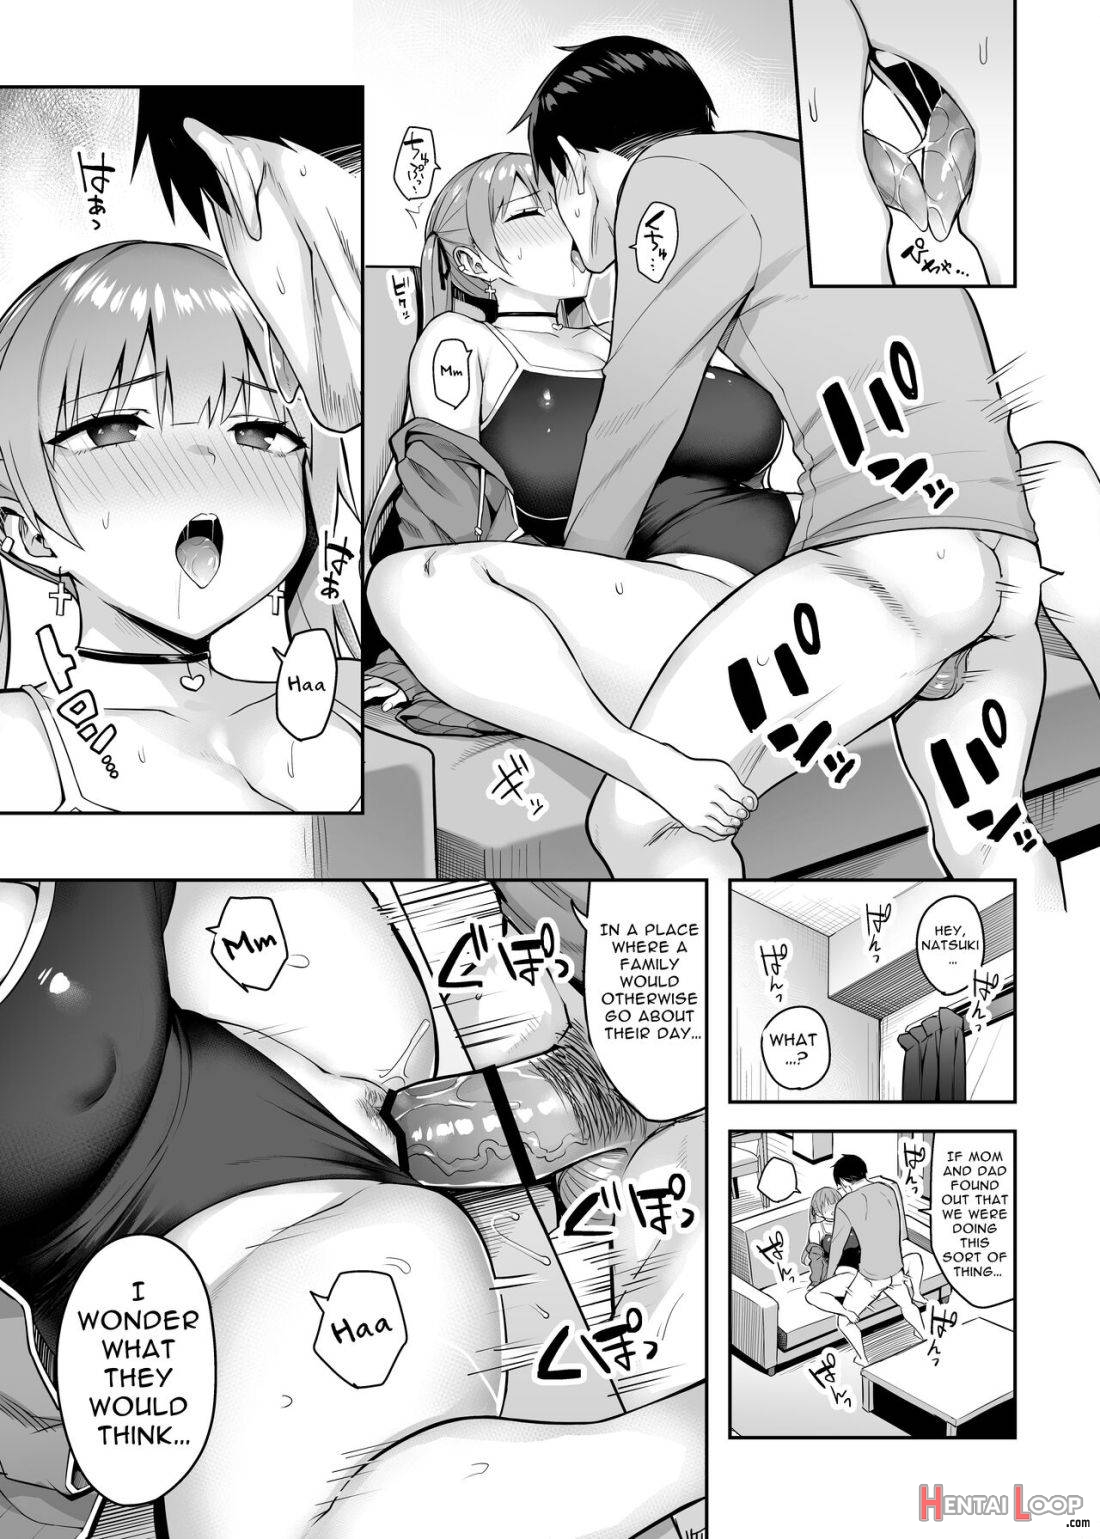 I Can’t Handle My Former Bookworm Little Sister Now That She’s a Slut! 2 page 23